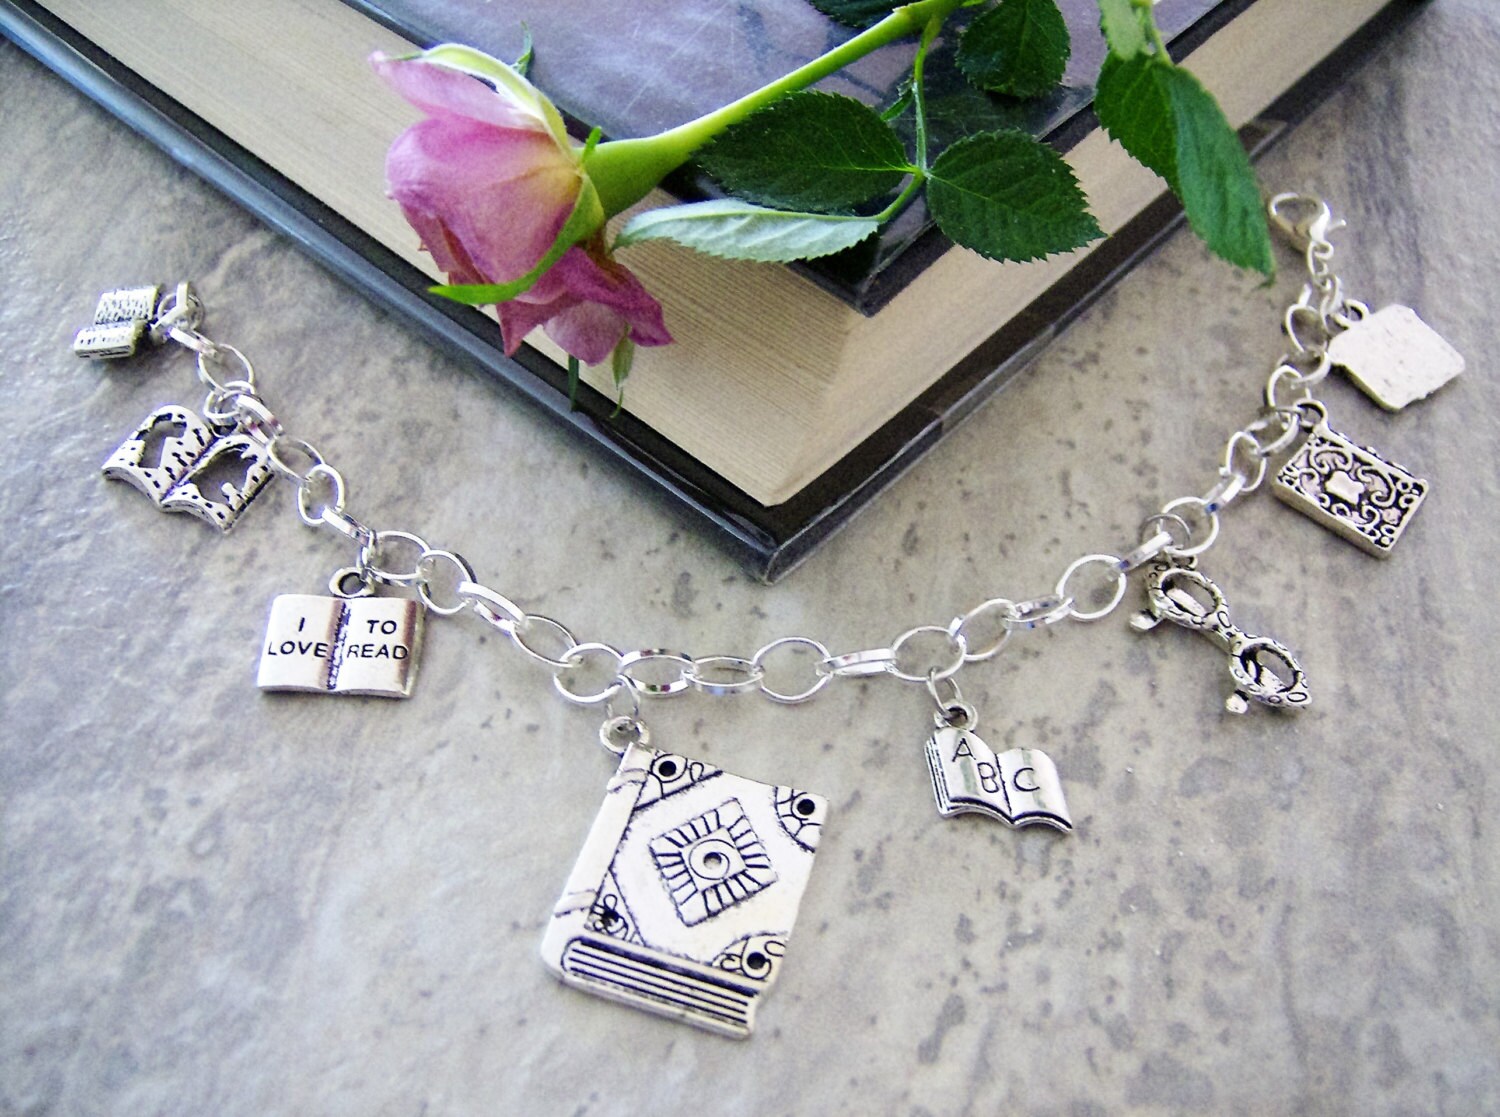 Open Book Charm, Gold Book Charm for Necklace or Bracelet, Librarian Charm,  Gift for Teacher, Love to Read, Book Club Gift, Reading Jewelry 